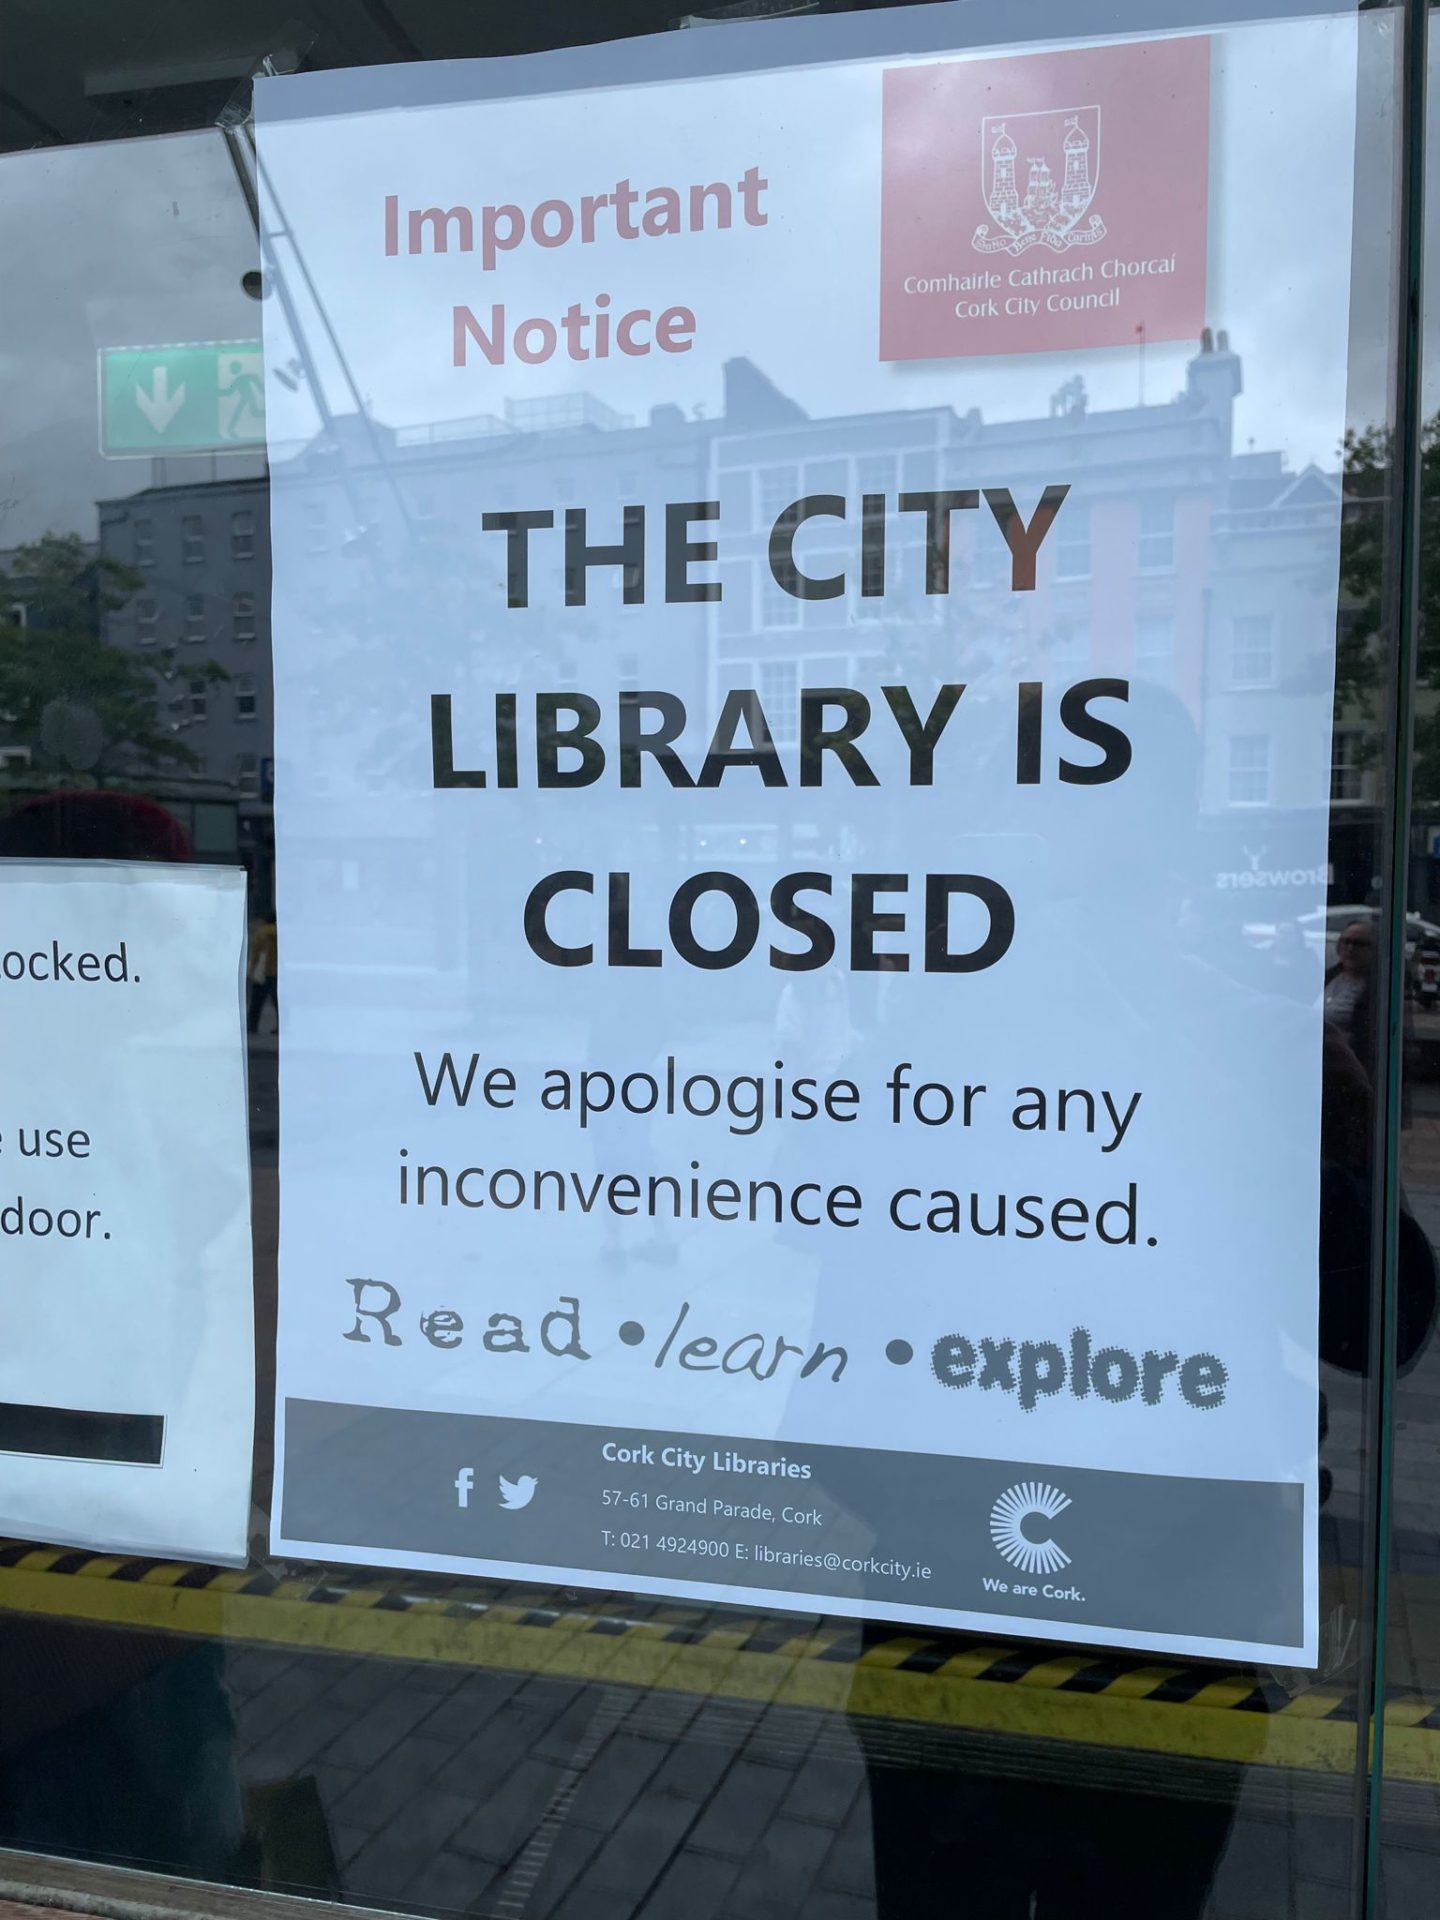 Closure of Cork City Library for protest